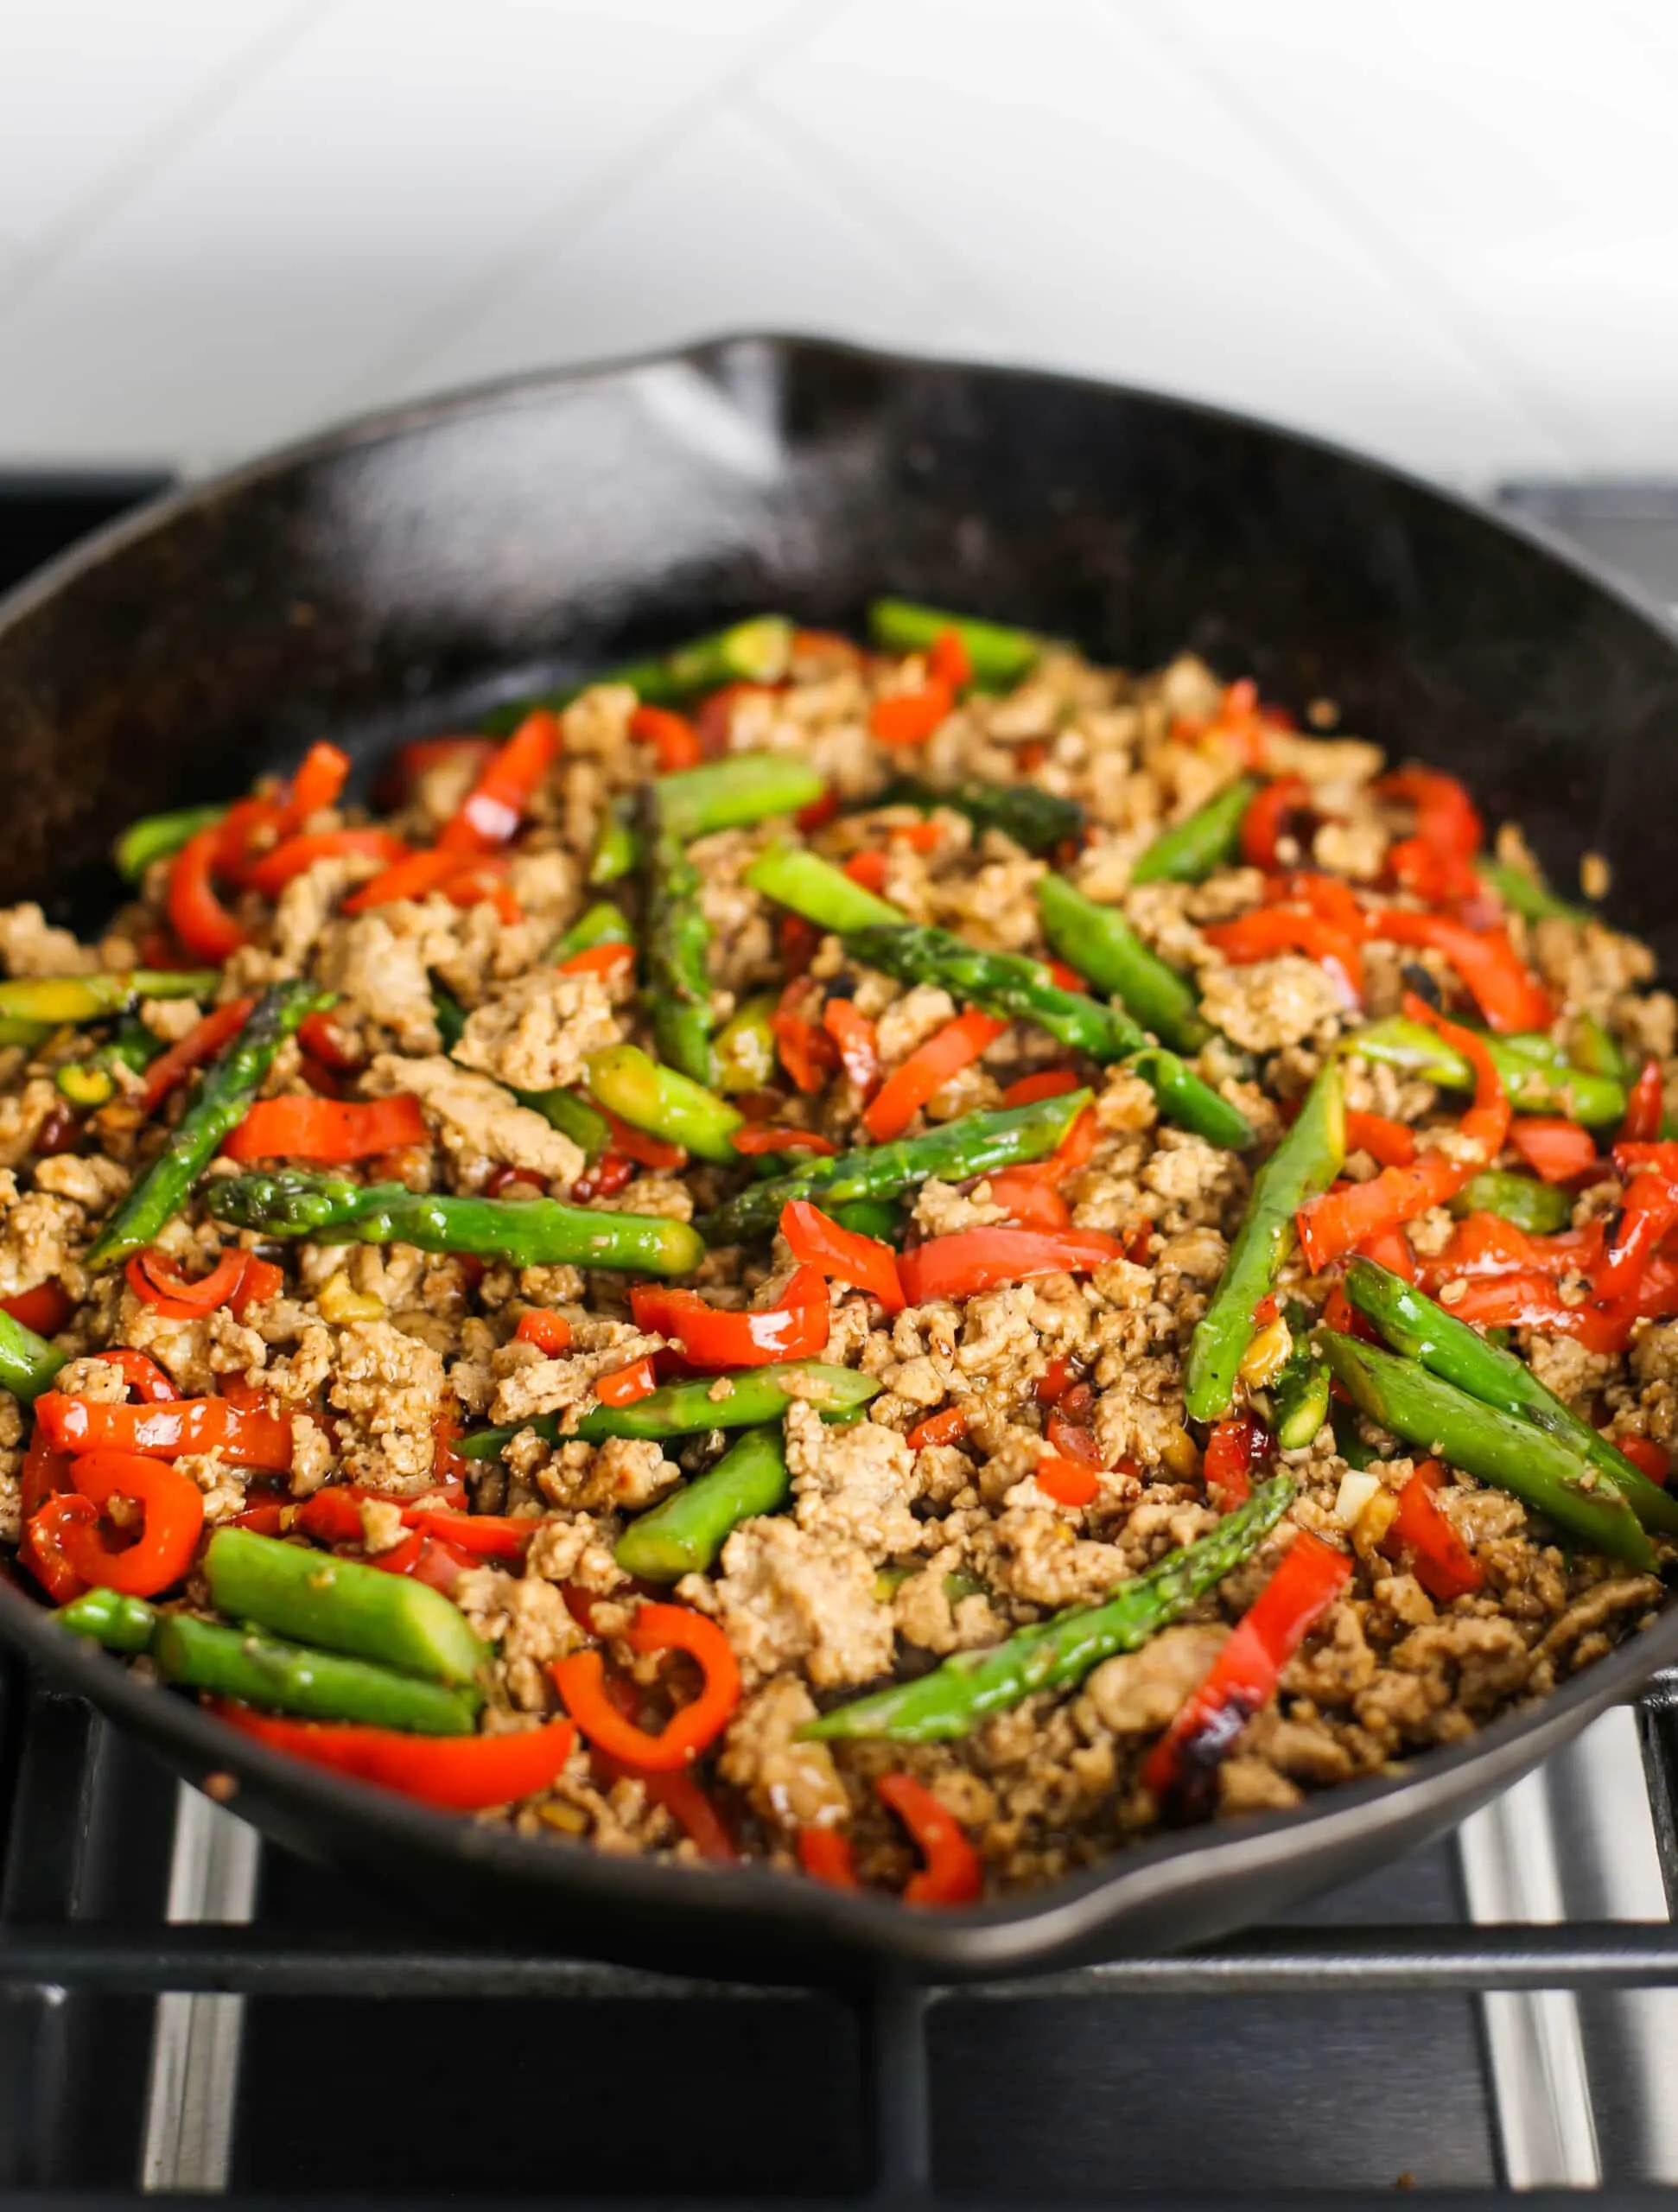 Stir-fried ground turkey, asparagus, and bell pepper in a cast iron skillet.